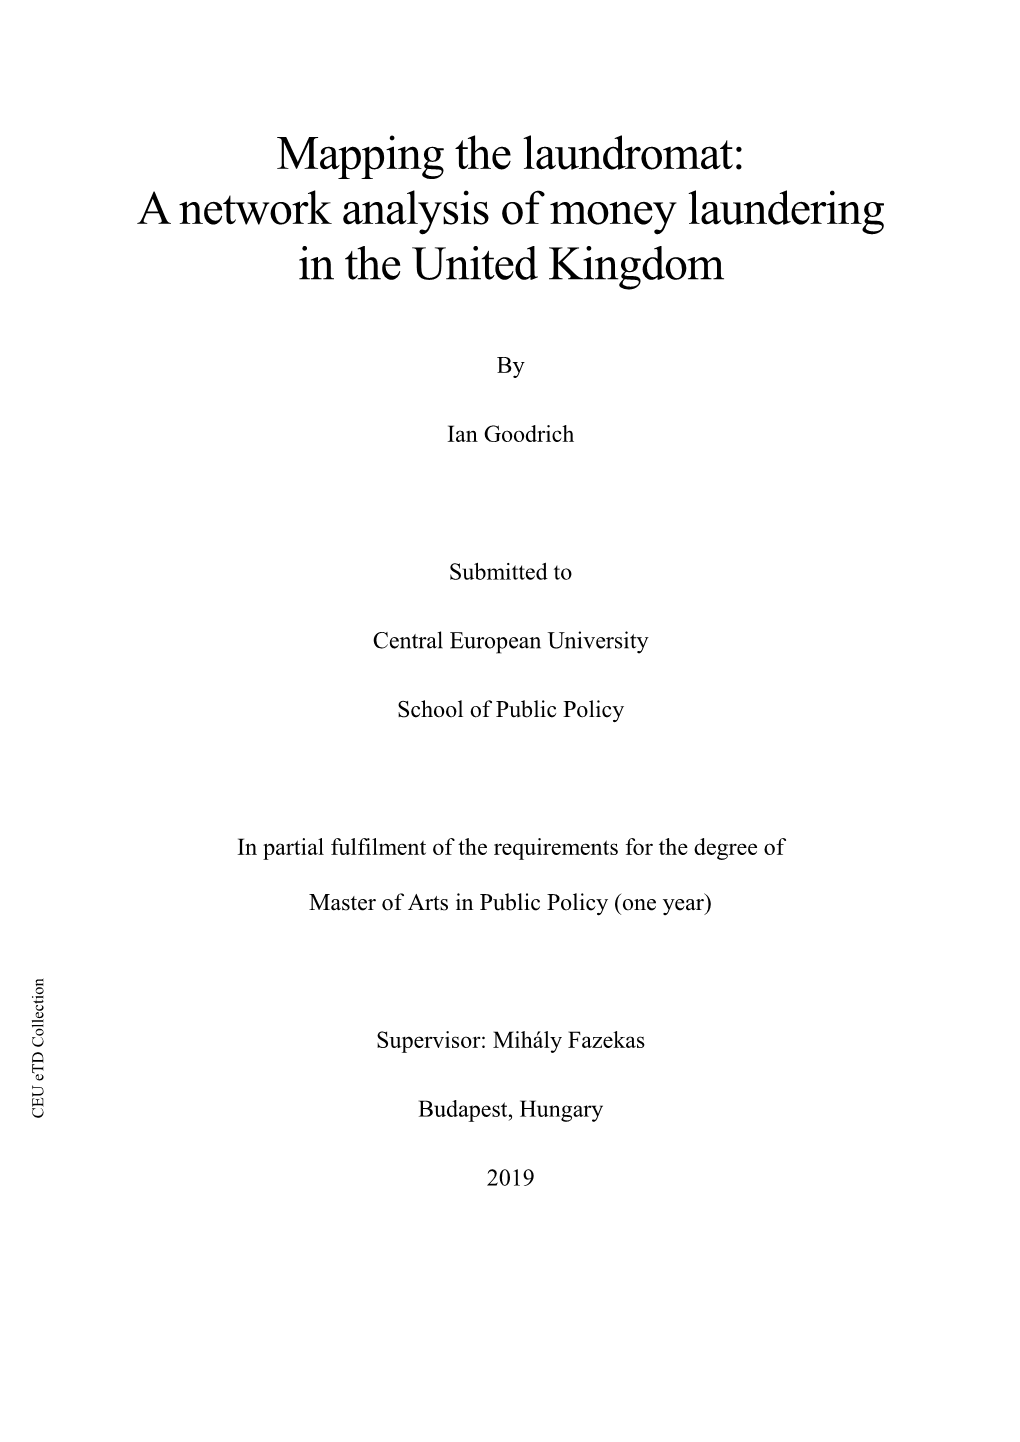 A Network Analysis of Money Laundering in the United Kingdom